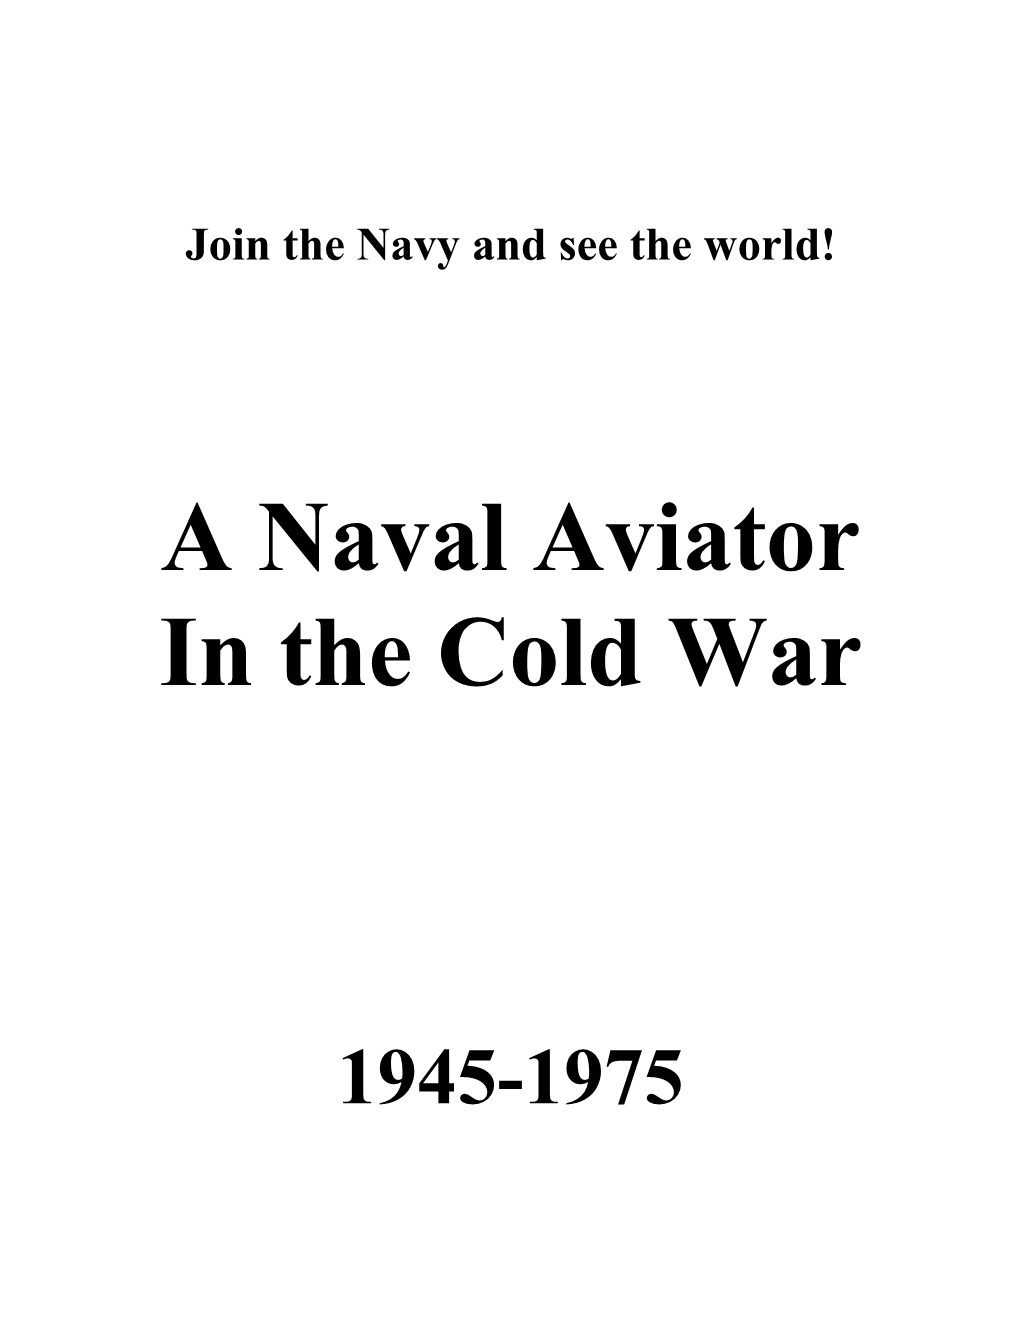 A Naval Aviator in the Cold War